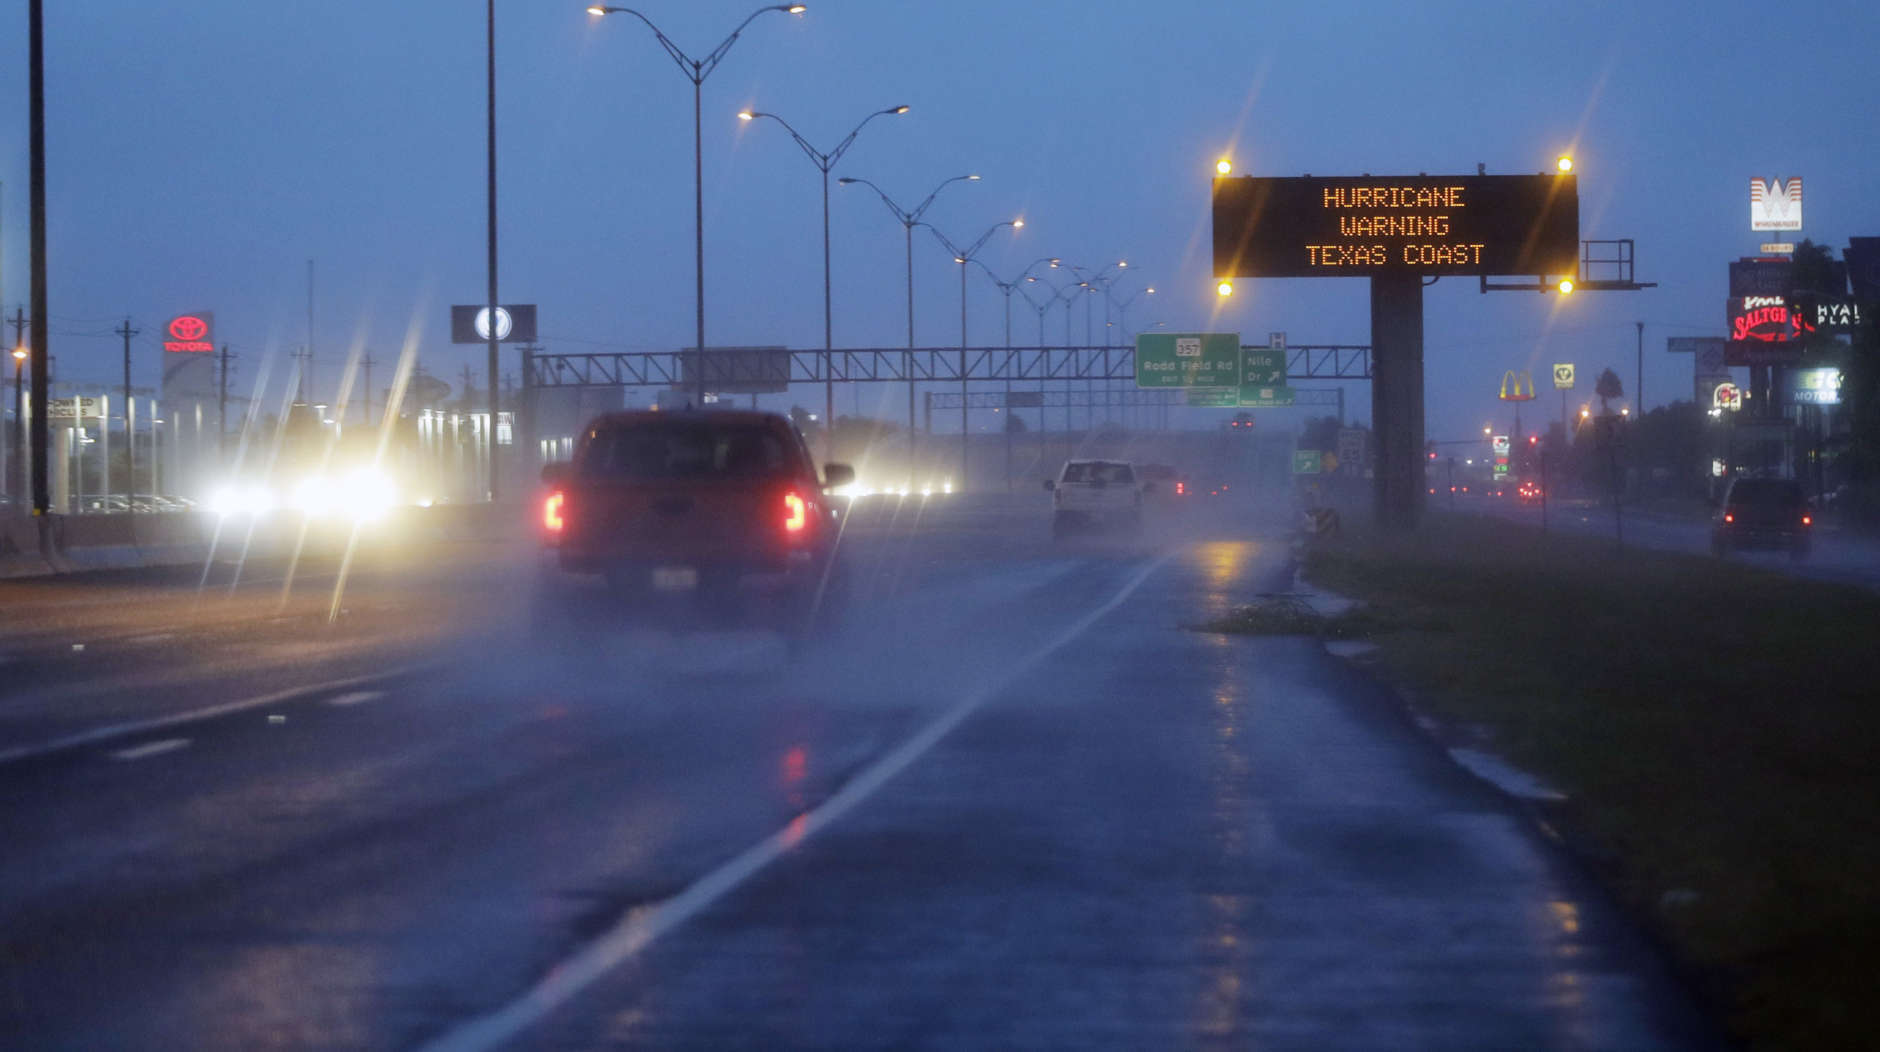 Motorists pass a warning sign  as Hurricane Harvey approaches the Gulf Coast area Friday, Aug. 25, 2017, in Corpus Christi, Texas.  The slow-moving hurricane could be the fiercest such storm to hit the United States in almost a dozen years. Forecasters labeled Harvey a "life-threatening storm" that posed a "grave risk" as millions of people braced for a prolonged battering. (AP Photo/Eric Gay)